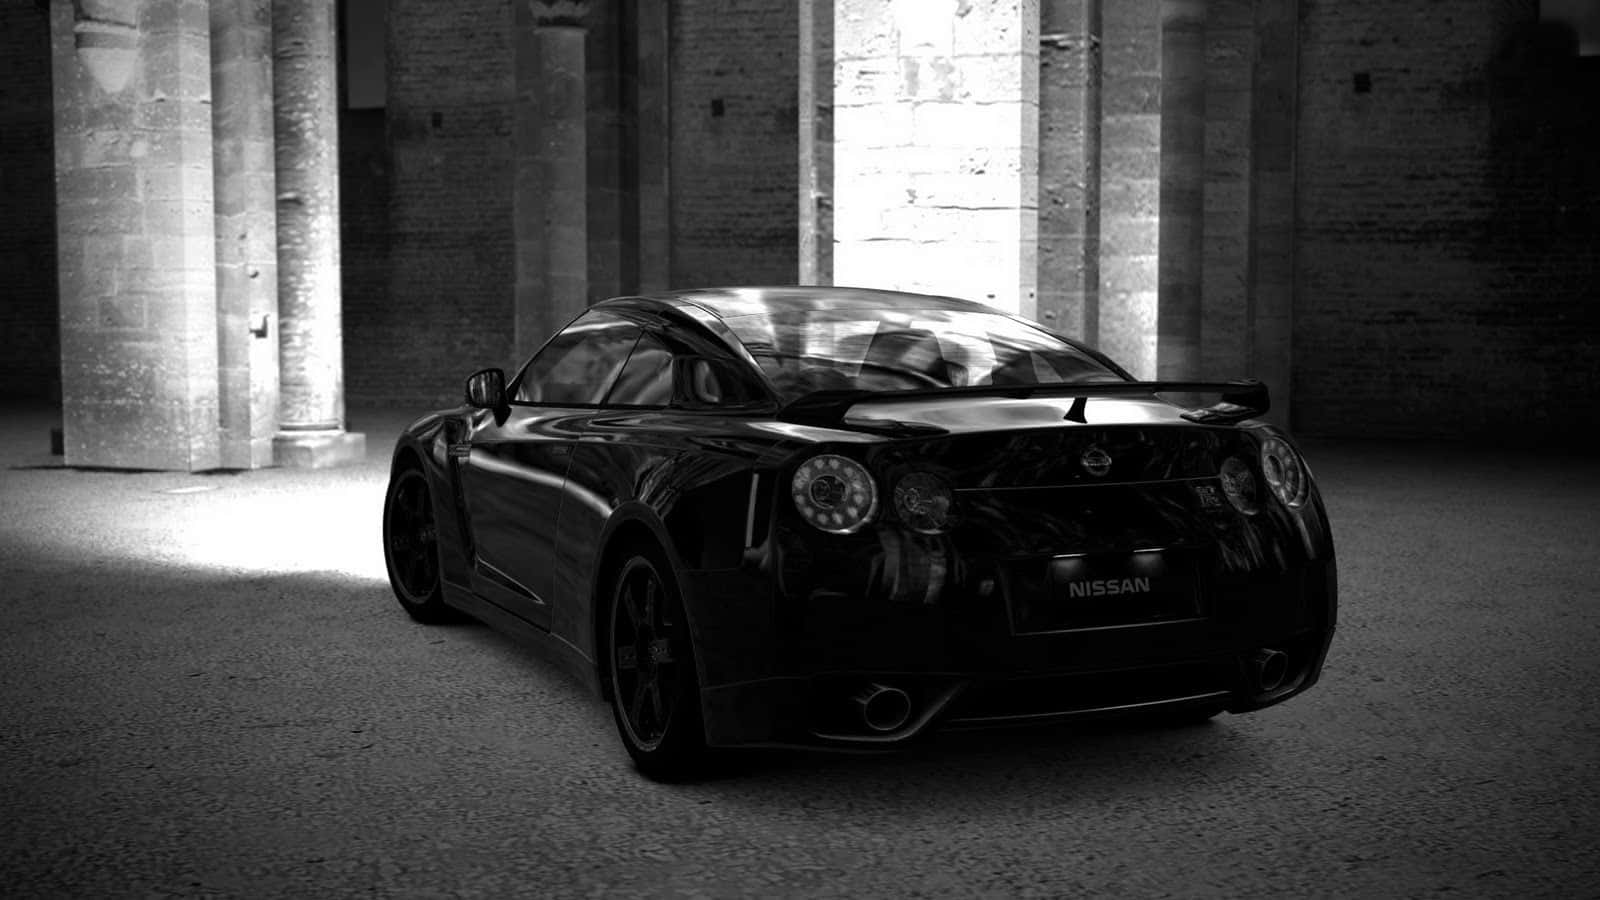 Get Ready For The Ride Of Your Life In A Cool Gtr! Background